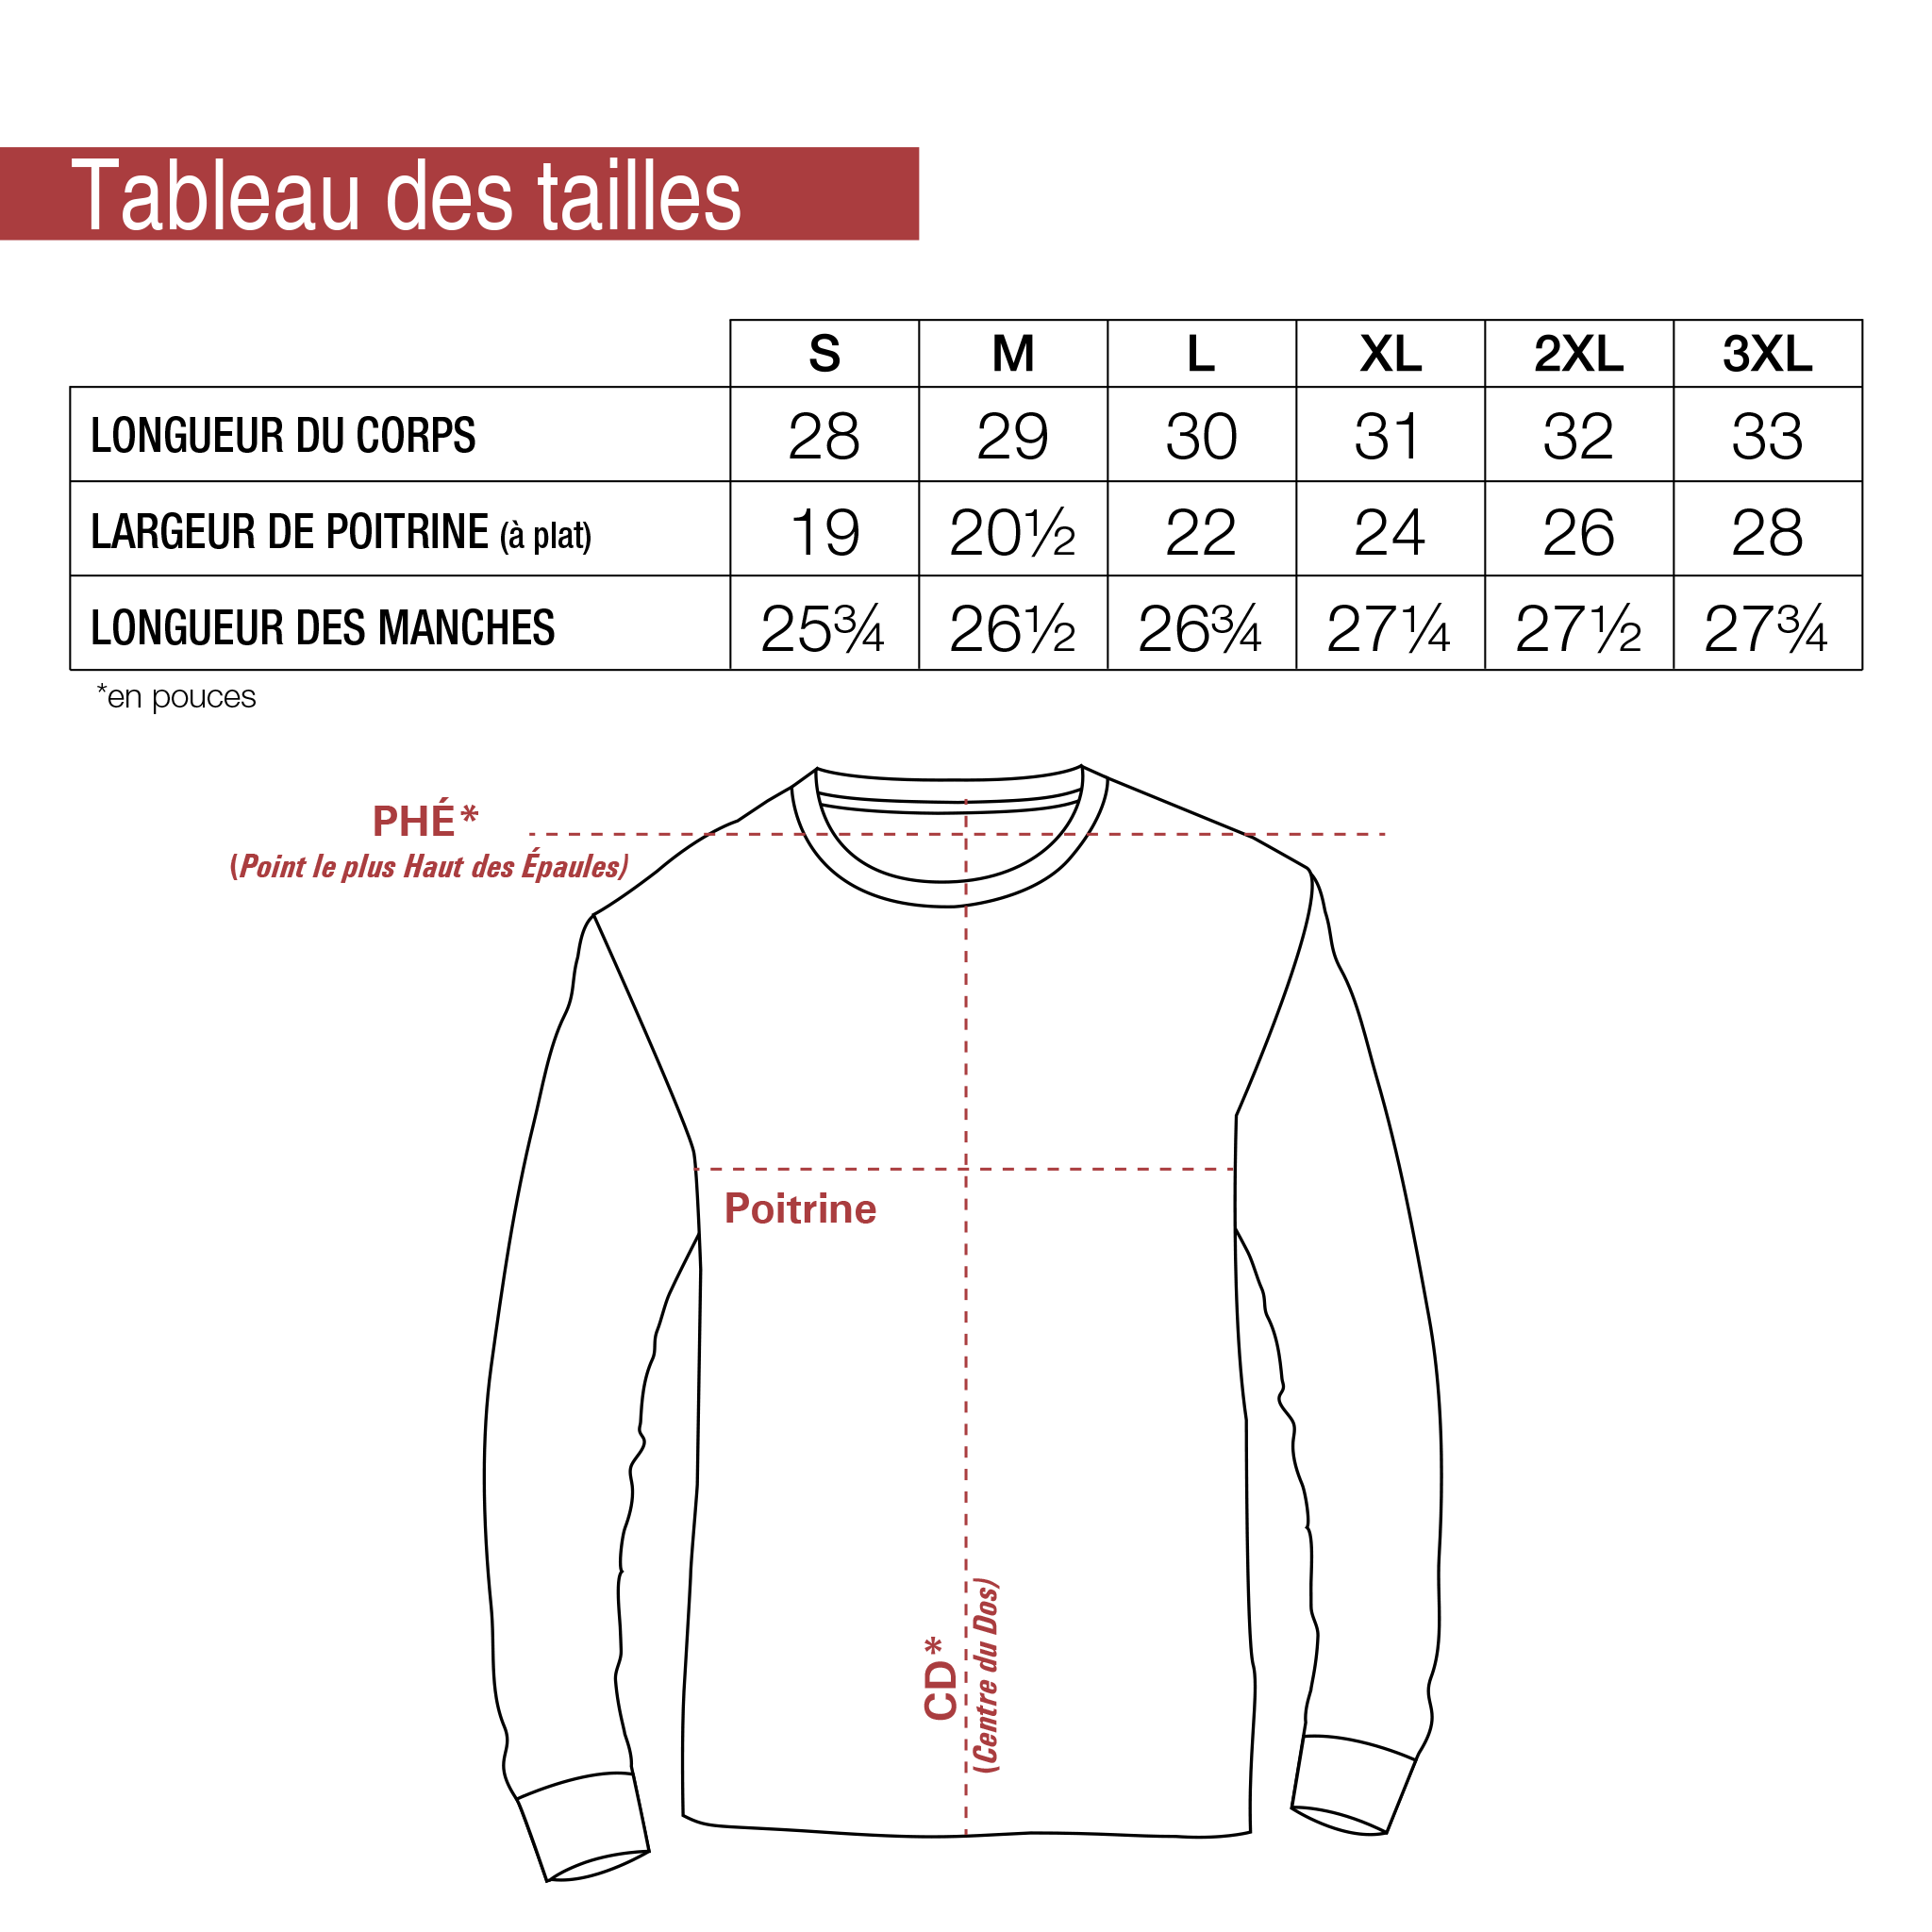 Tableau-taille-6211NL_4b9c0116-47b0-428a-994b-12d058aa2528.png